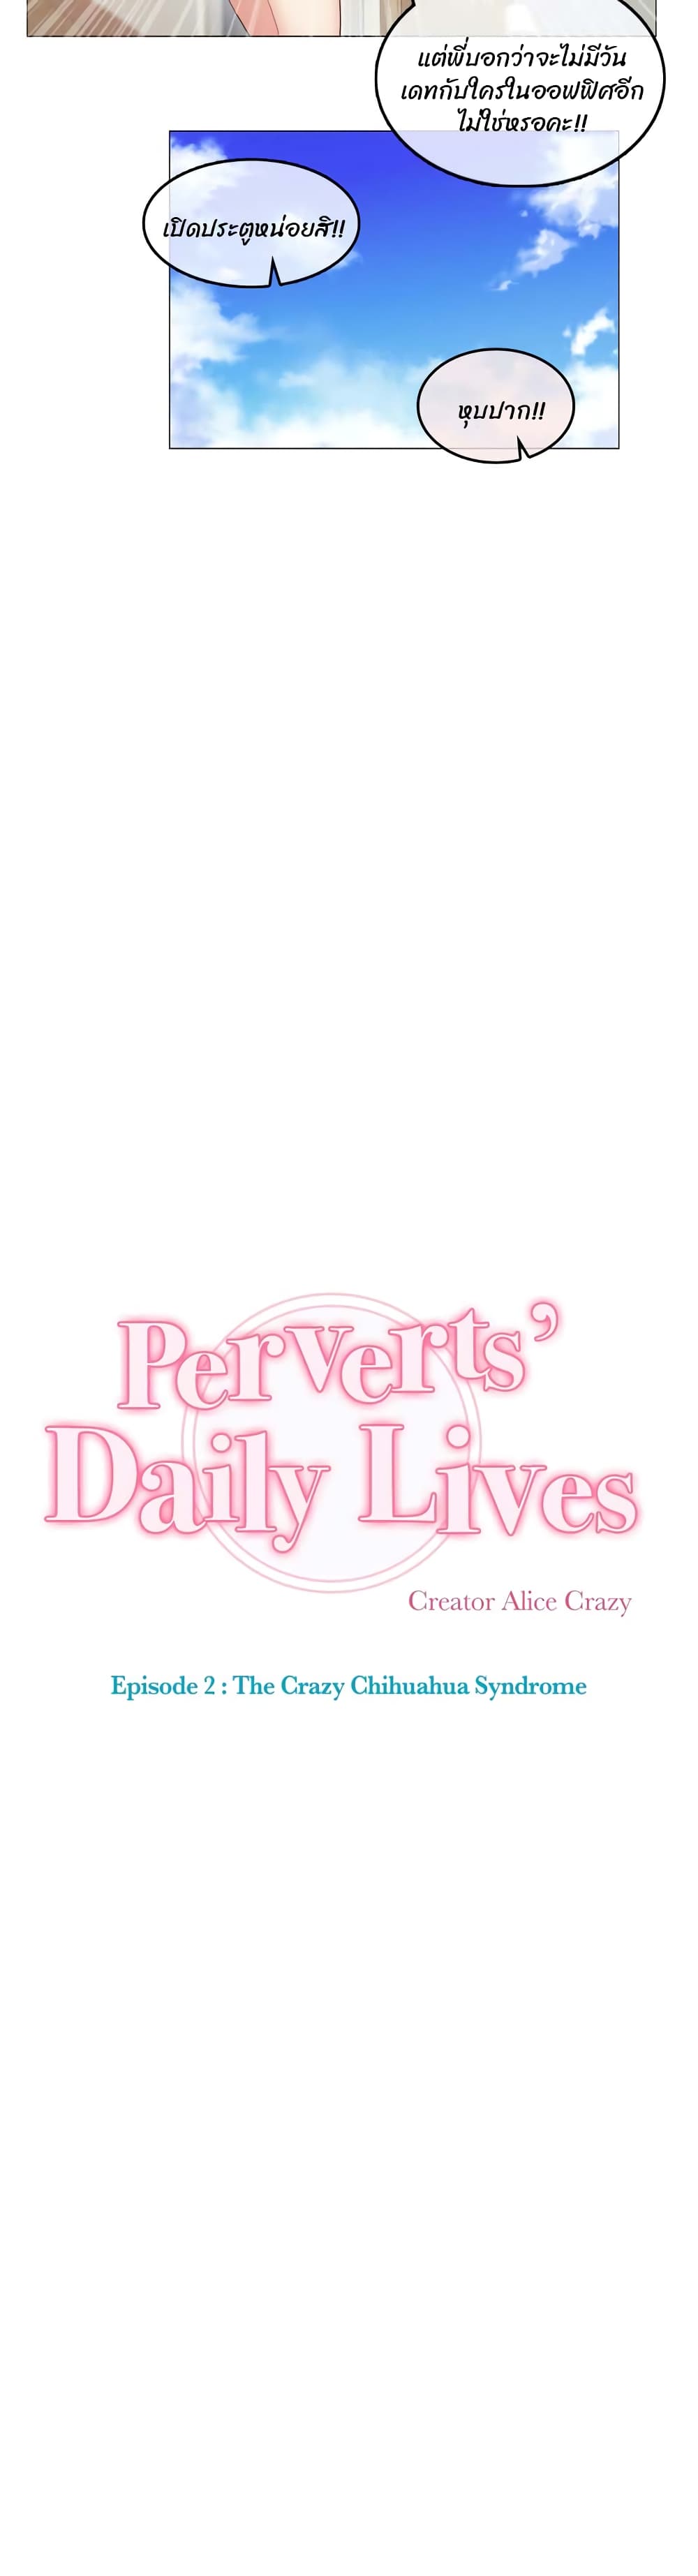 A Pervert's Daily Life 98-98